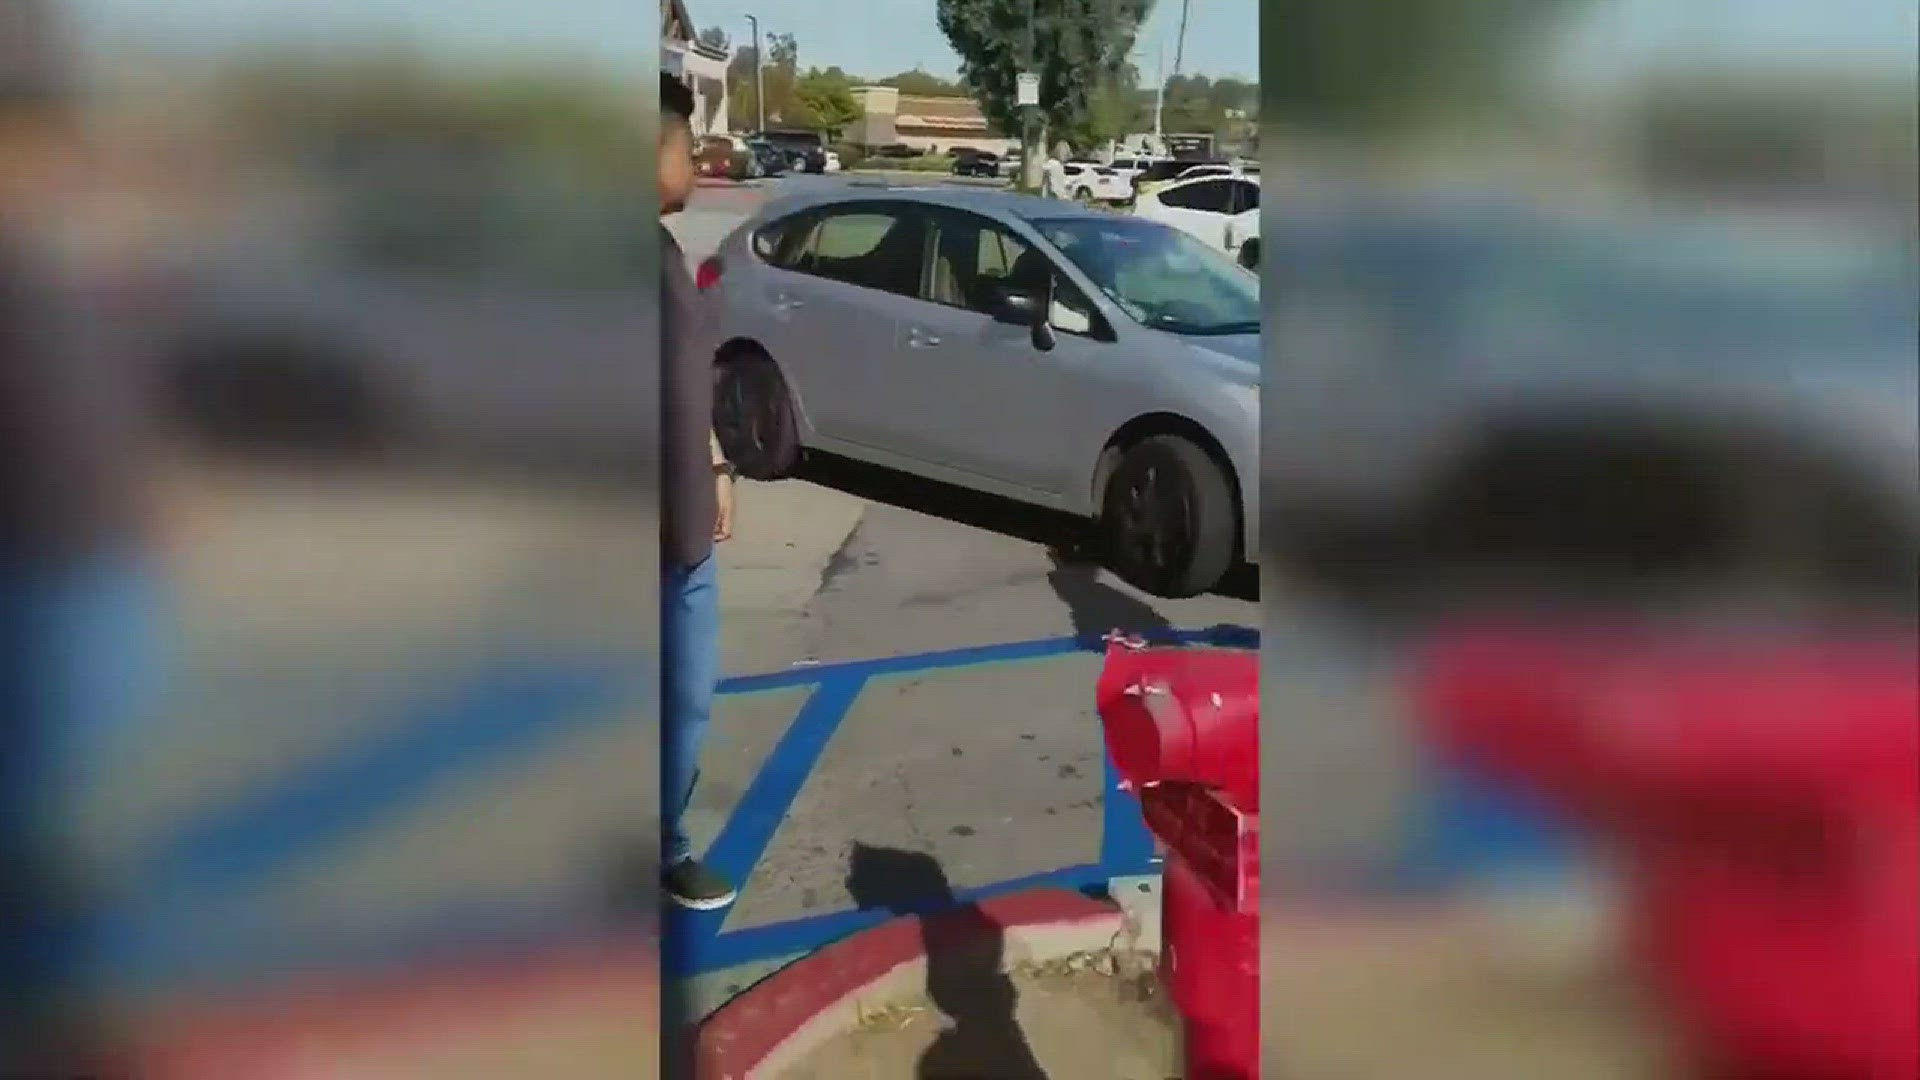 VIDEO via KNBC Domestic incident leads to road rage: